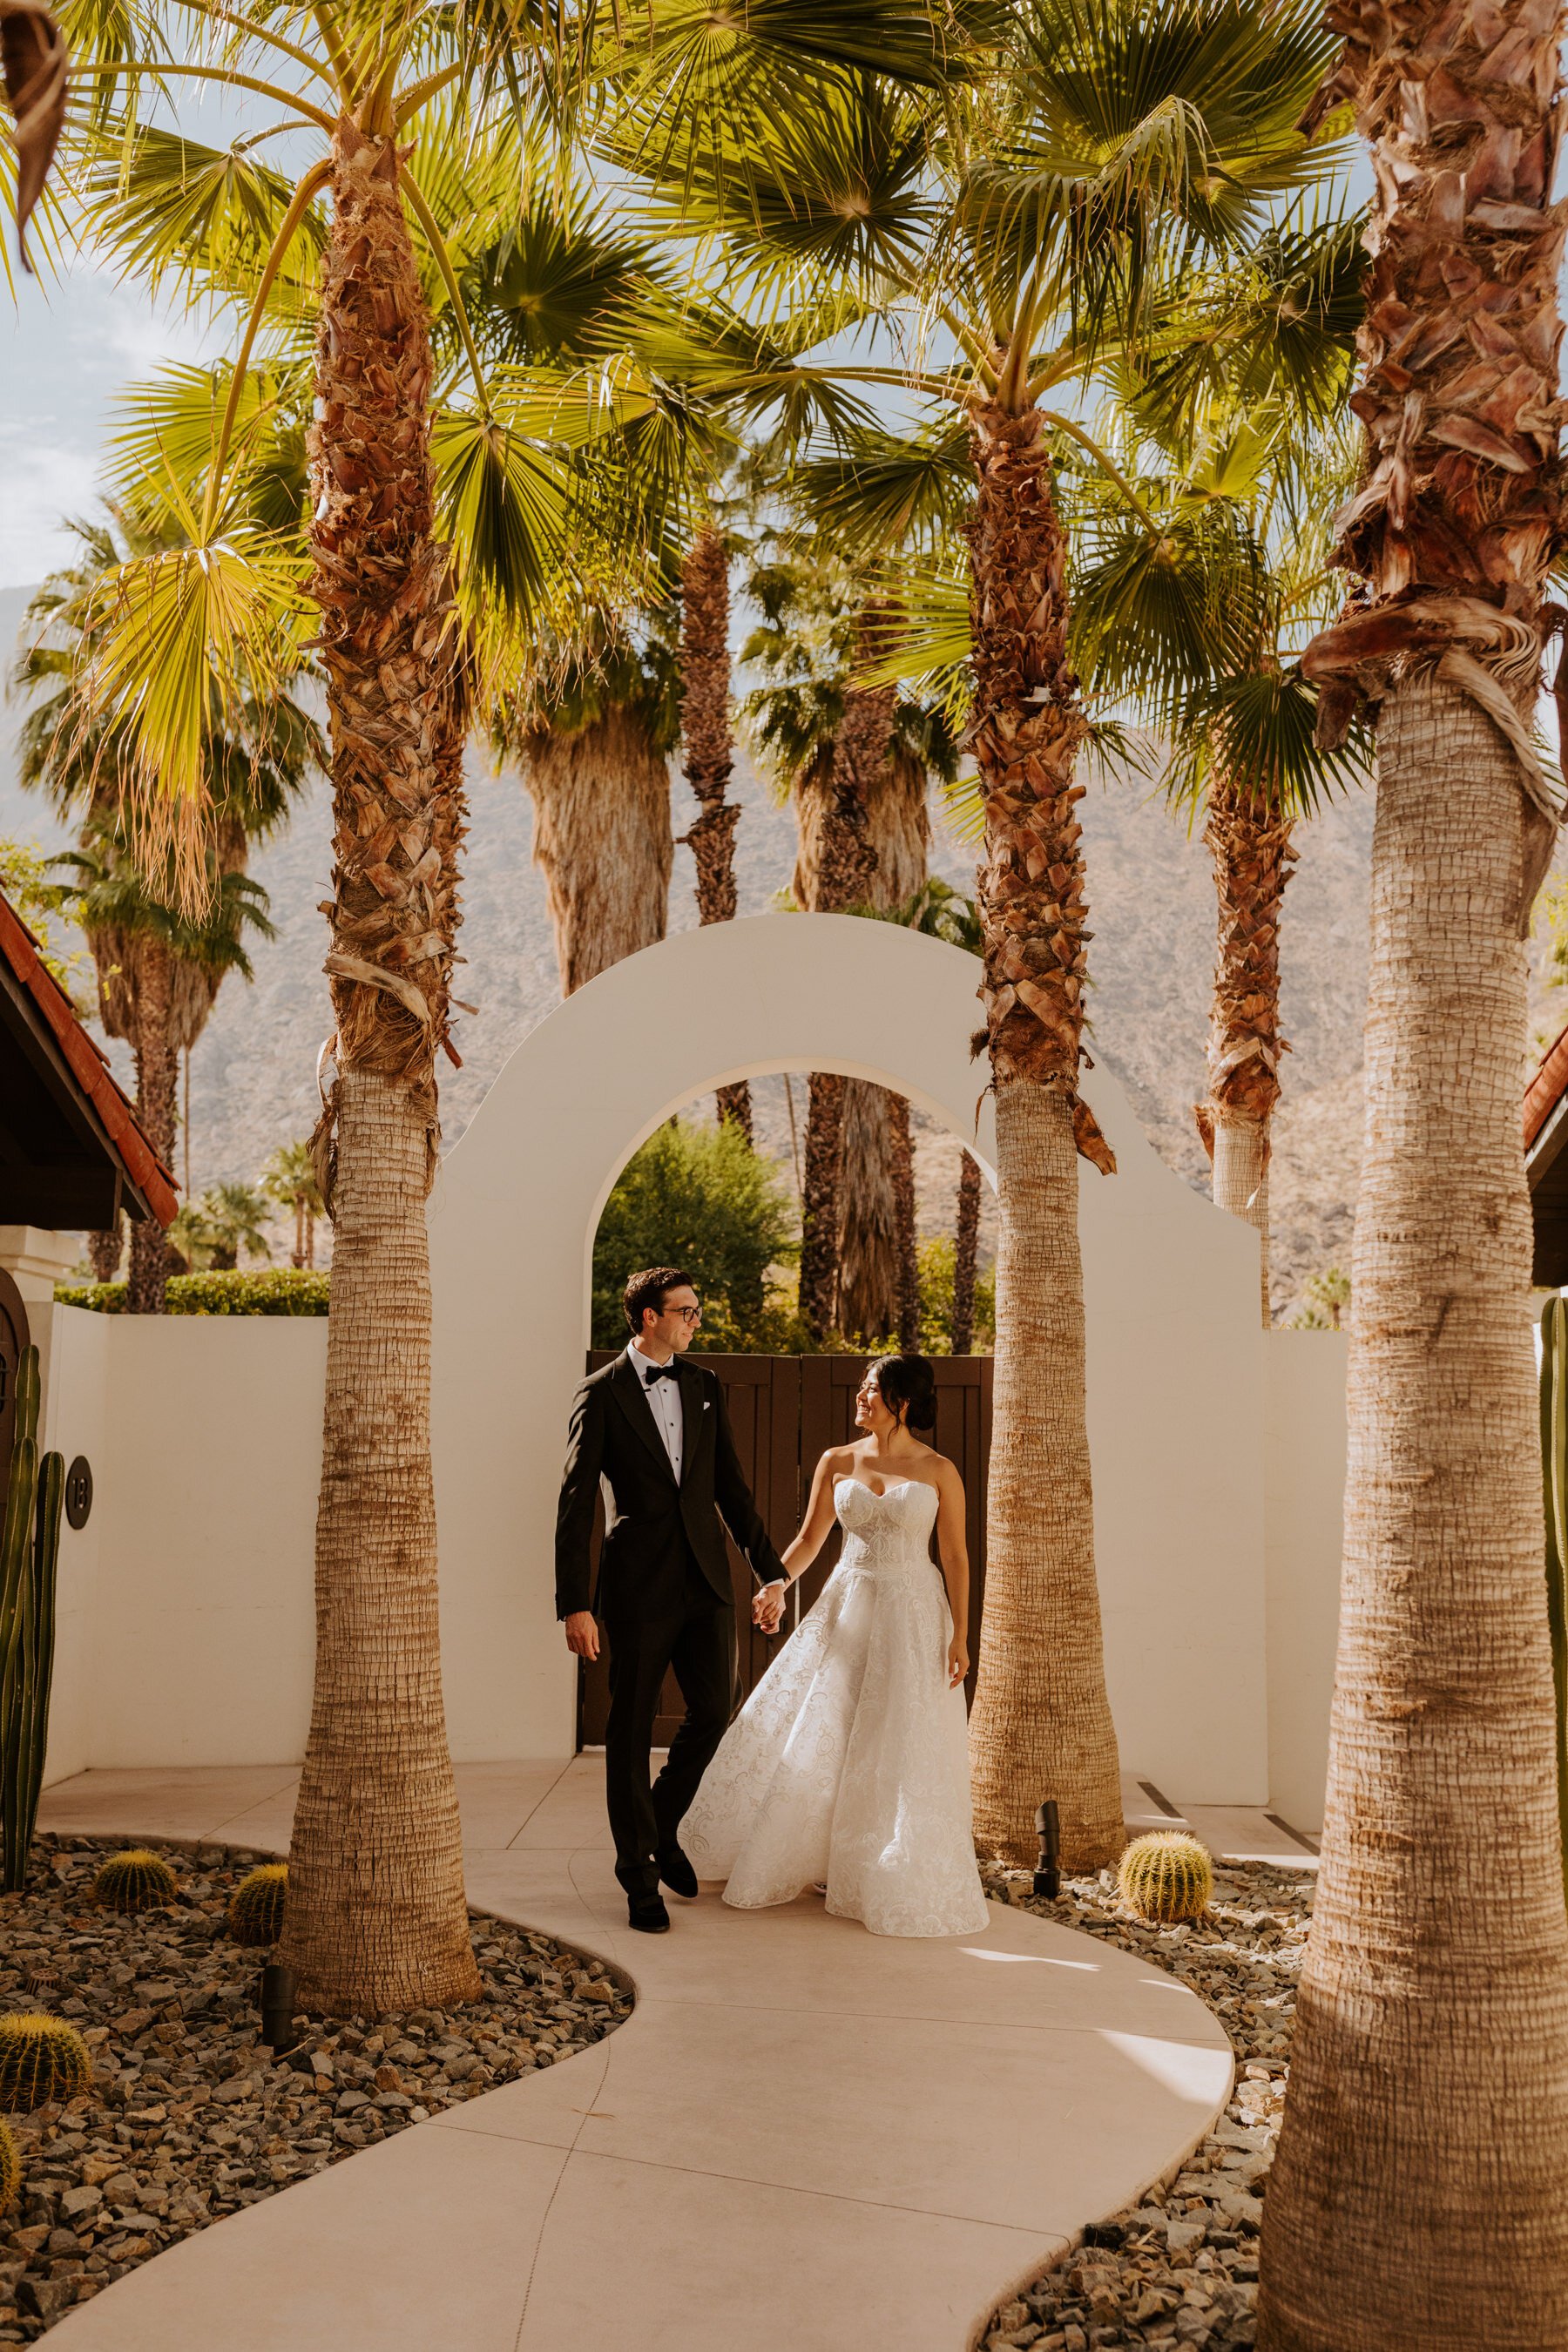 Bride and Groom First Look at La Serena Villas Palm Springs, Palm Springs Wedding Photographer, Photo by Tida Svy